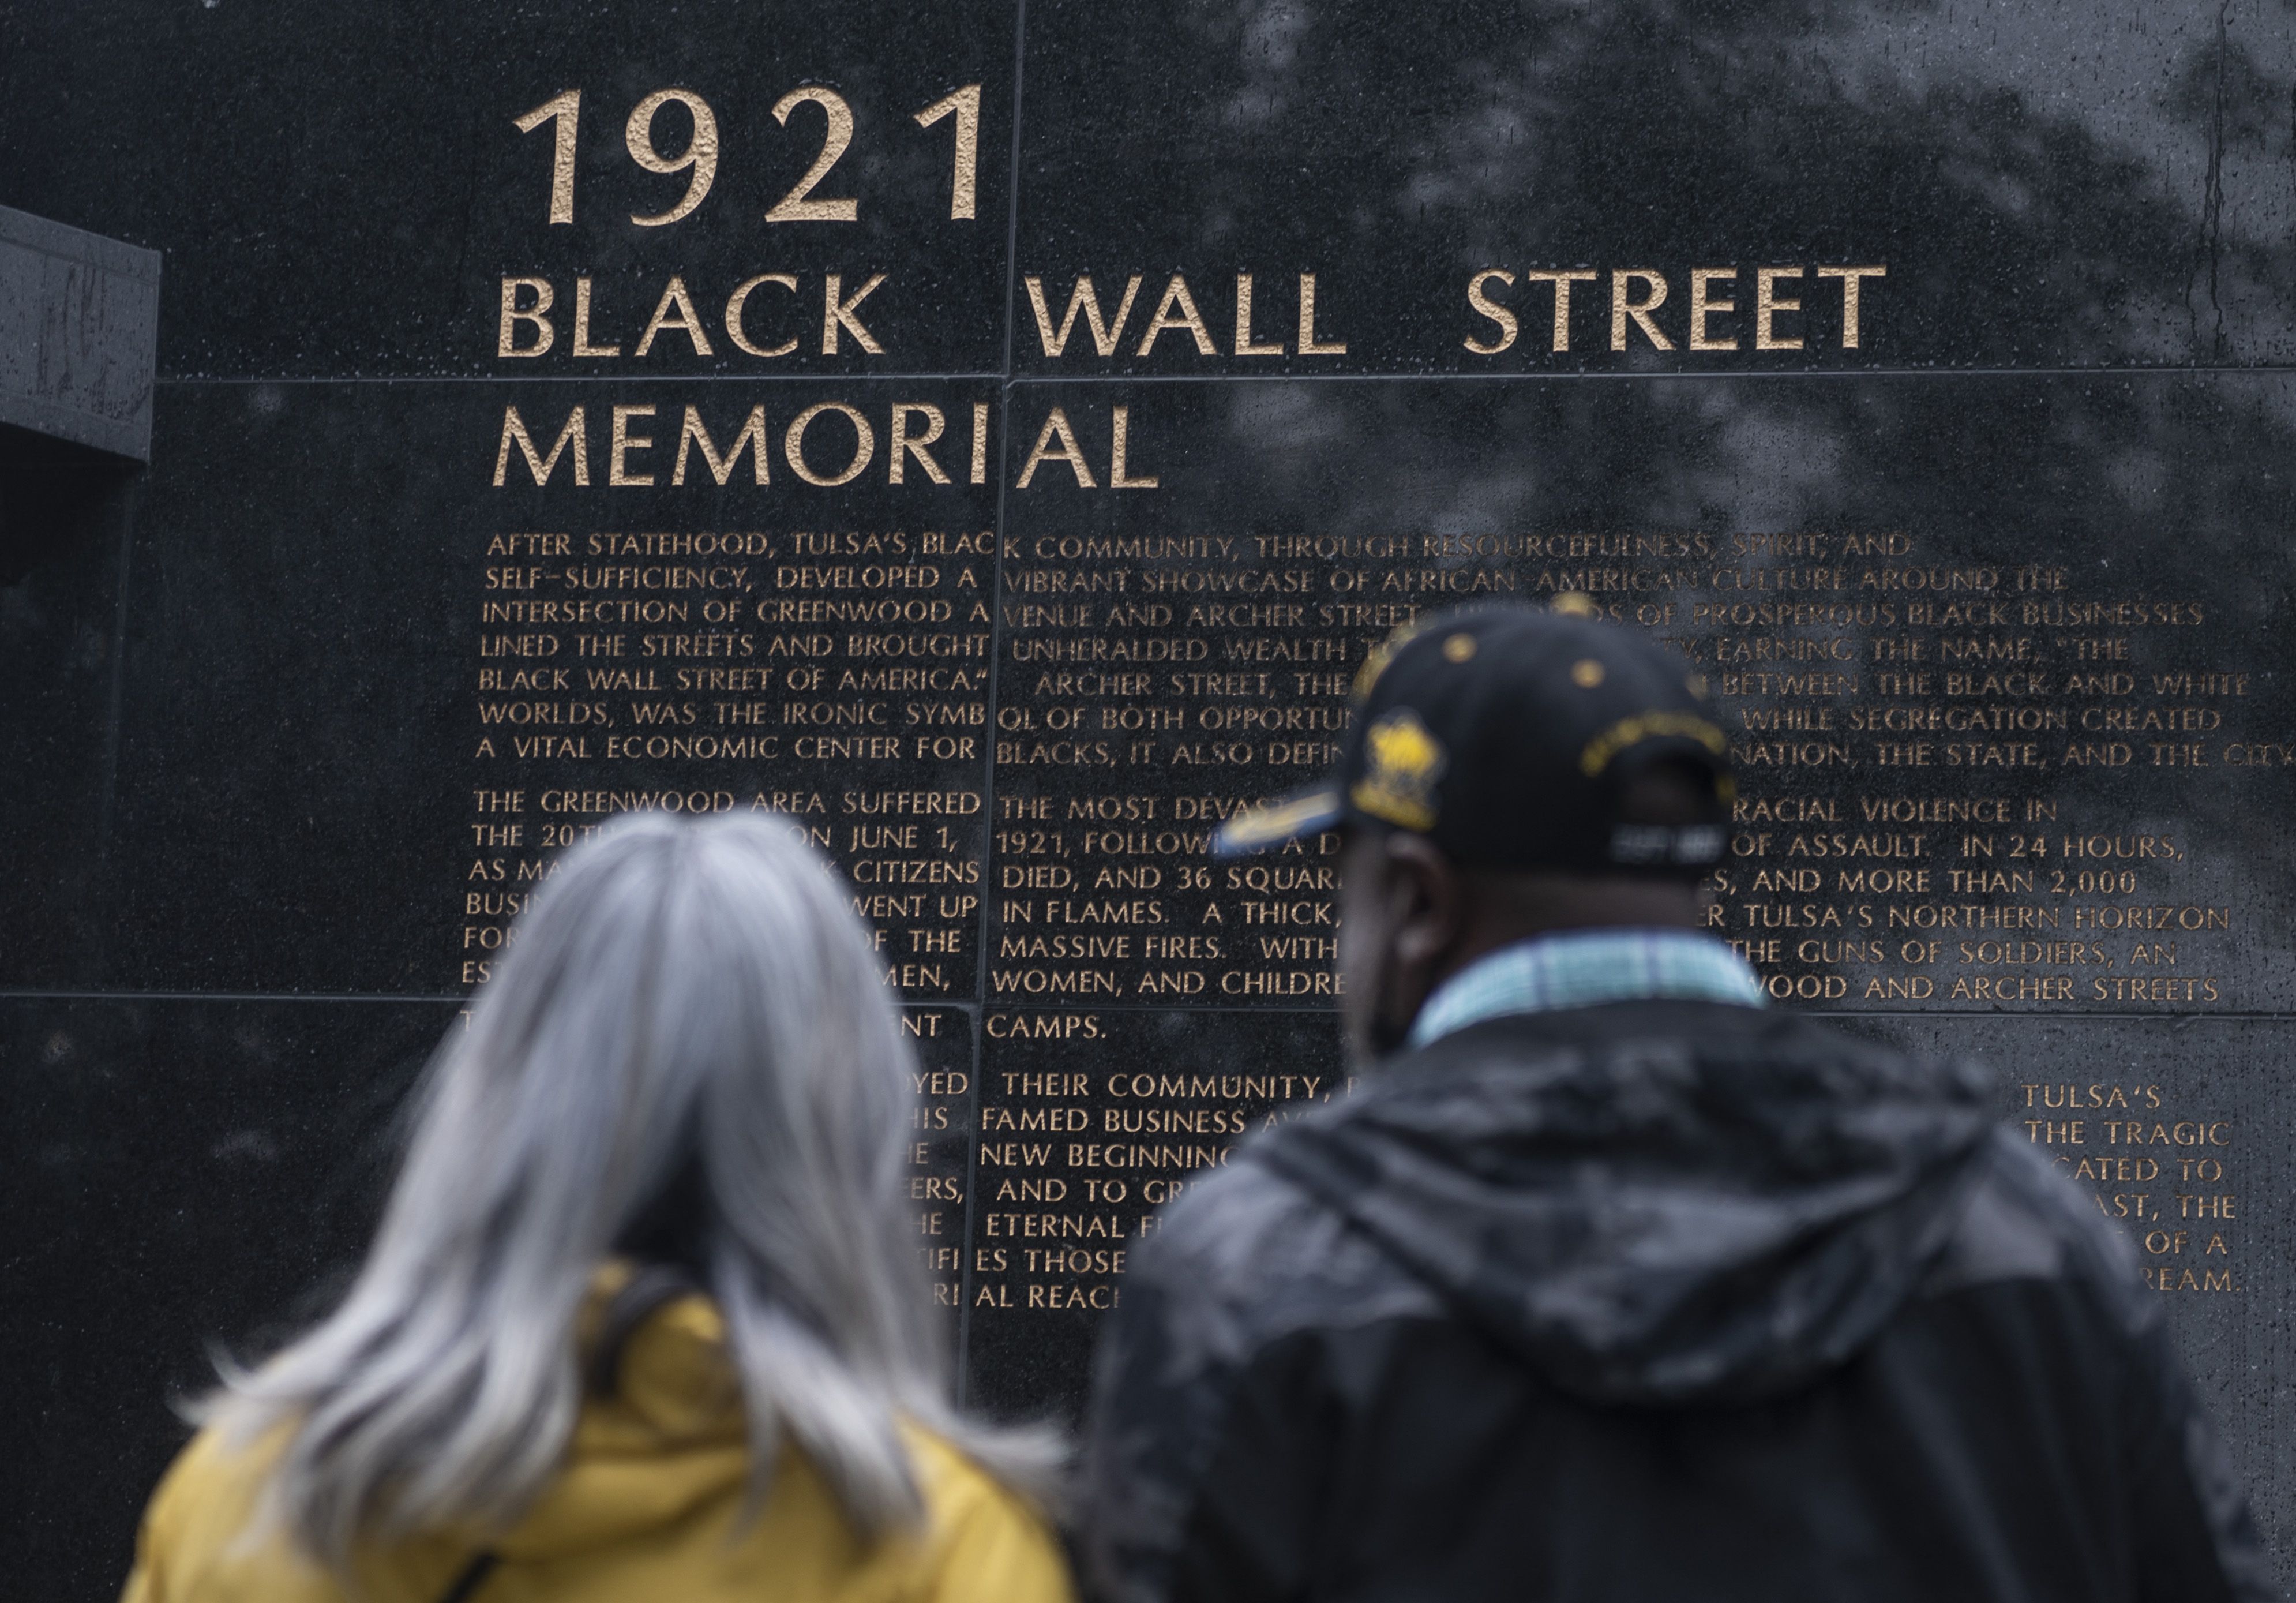 People look at the 1921 Black Wall Street Memorial on the 100 year anniversary of the Greenwood massacre in Tulsa, Oklahoma, on May 31